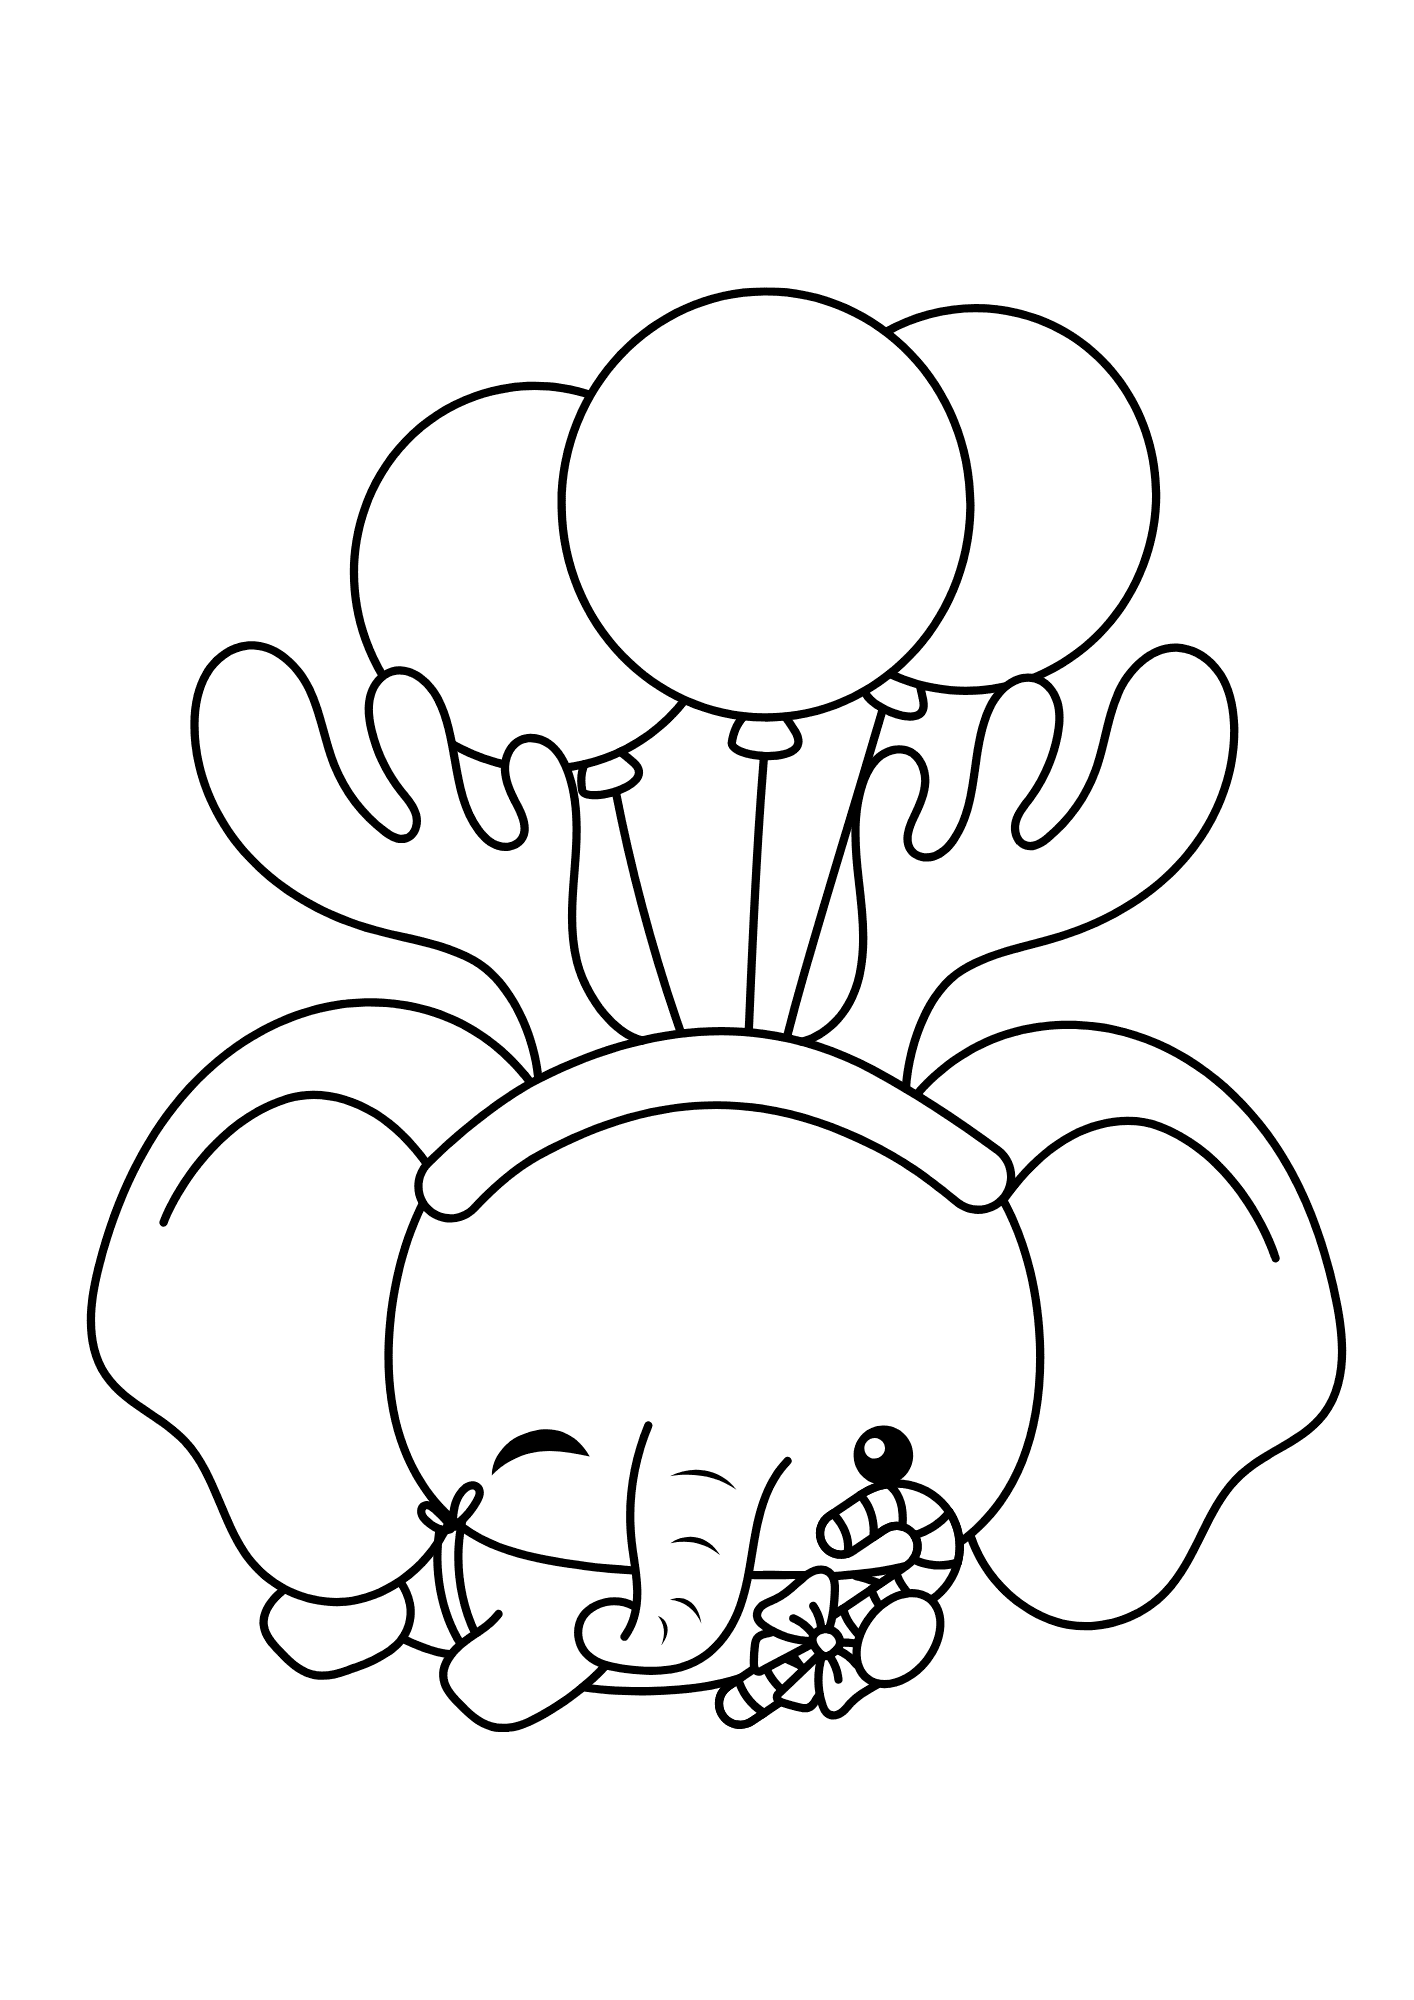 Elephant With Balloon Coloring Page